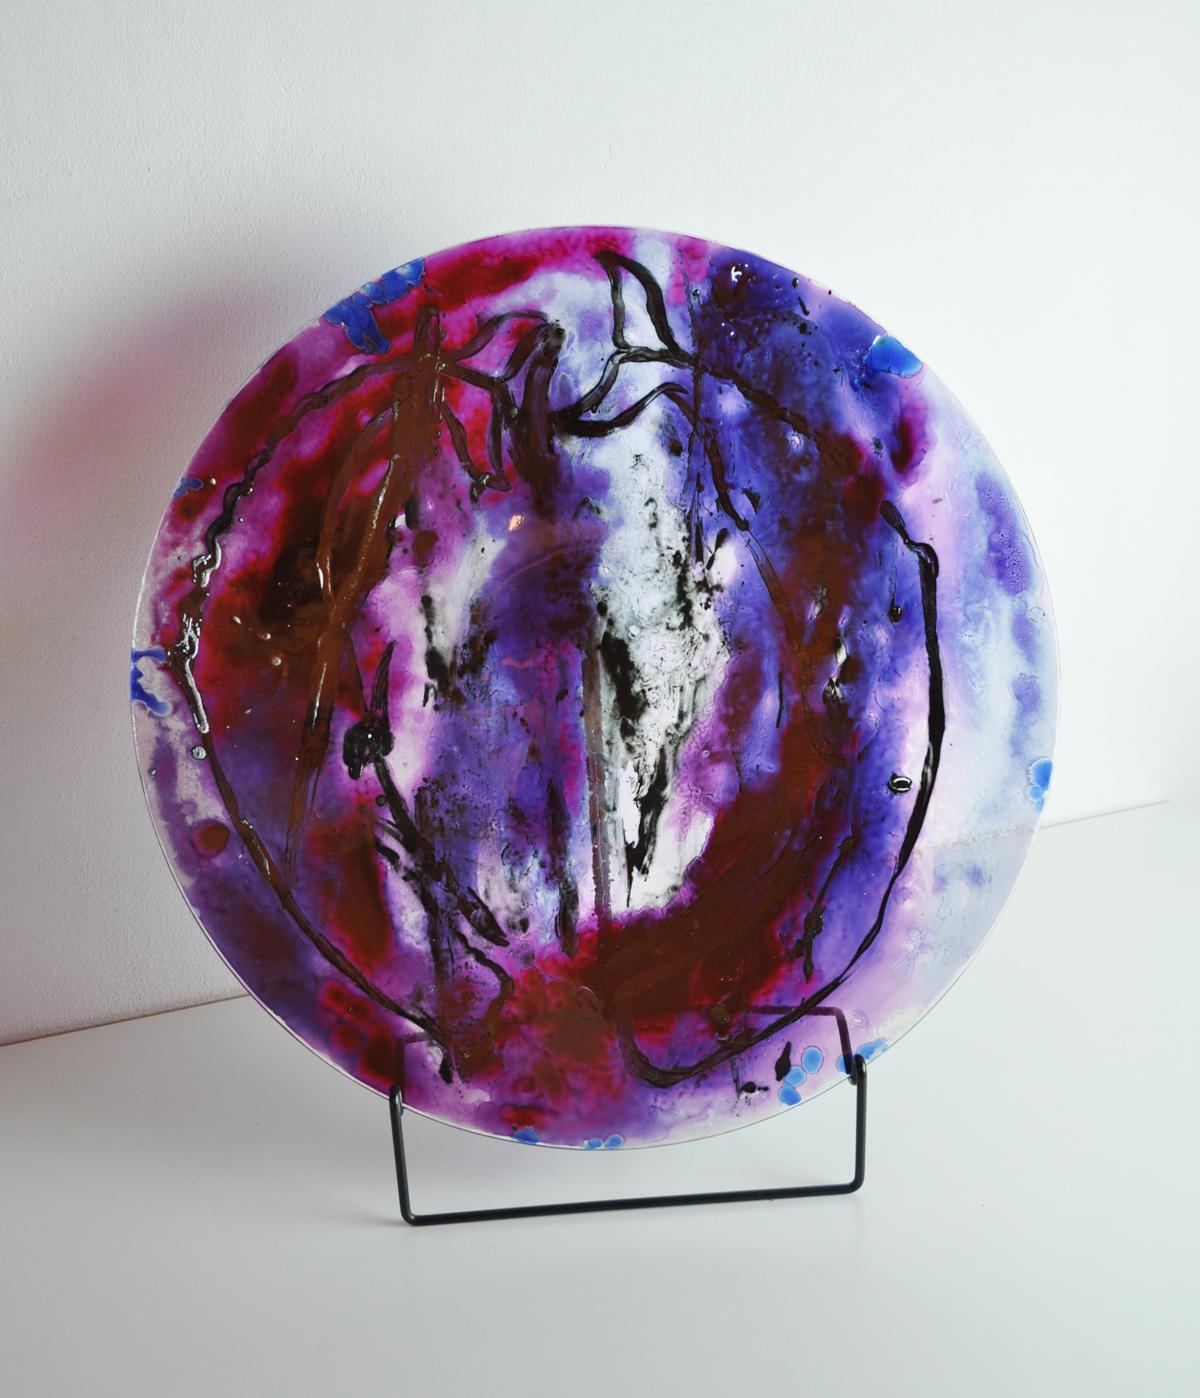 Stained Glass dish by Tróndur Patursson. Whale in red and purple colors with his ongoing theme of nature and ocean.

Diameter 50 cm x height 4 cm 

Tróndur Patursson (born 1 March 1944 in Kirkjubøur) is a Faroese painter, sculptor, glass artist and